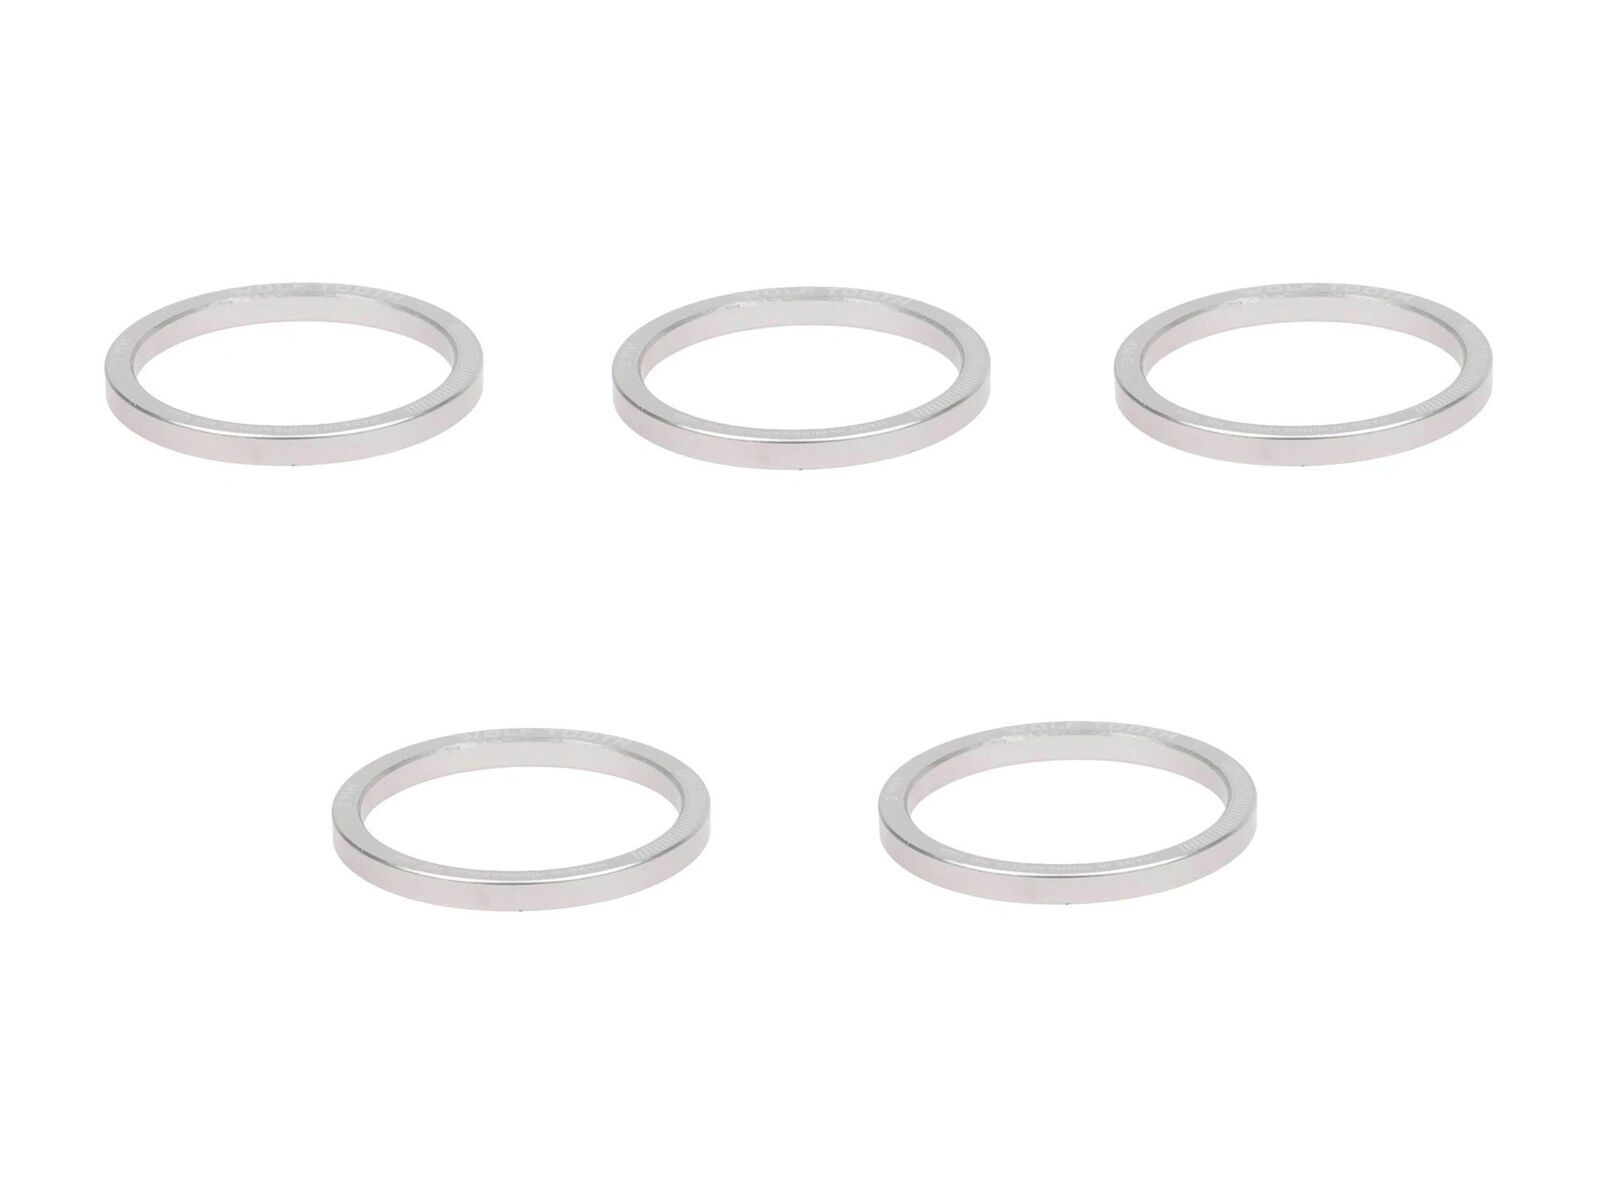 Wolf Tooth Precision Headset Spacers - 3 mm 5er Kit silver SPACER-SlL-5PACK-3MM